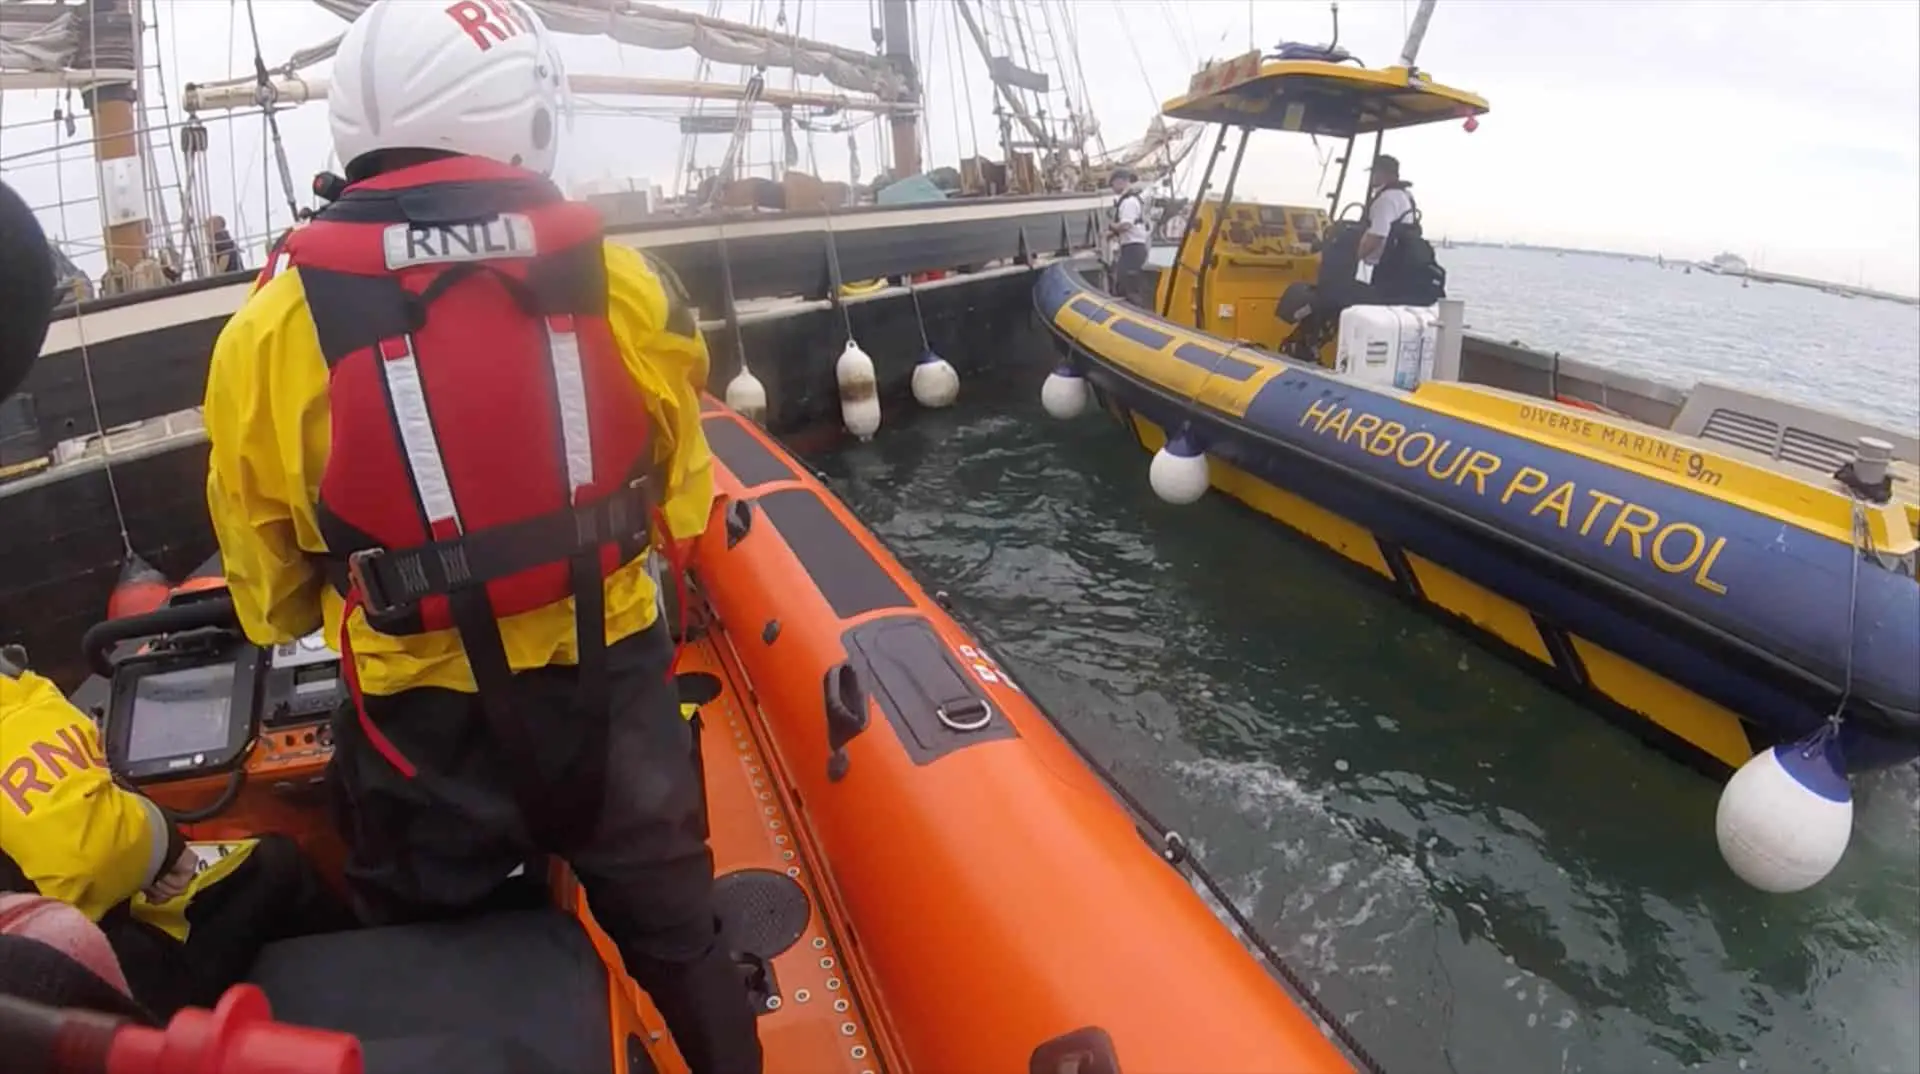 Lifeboat helps joins in the effort to bring the vessel to safety